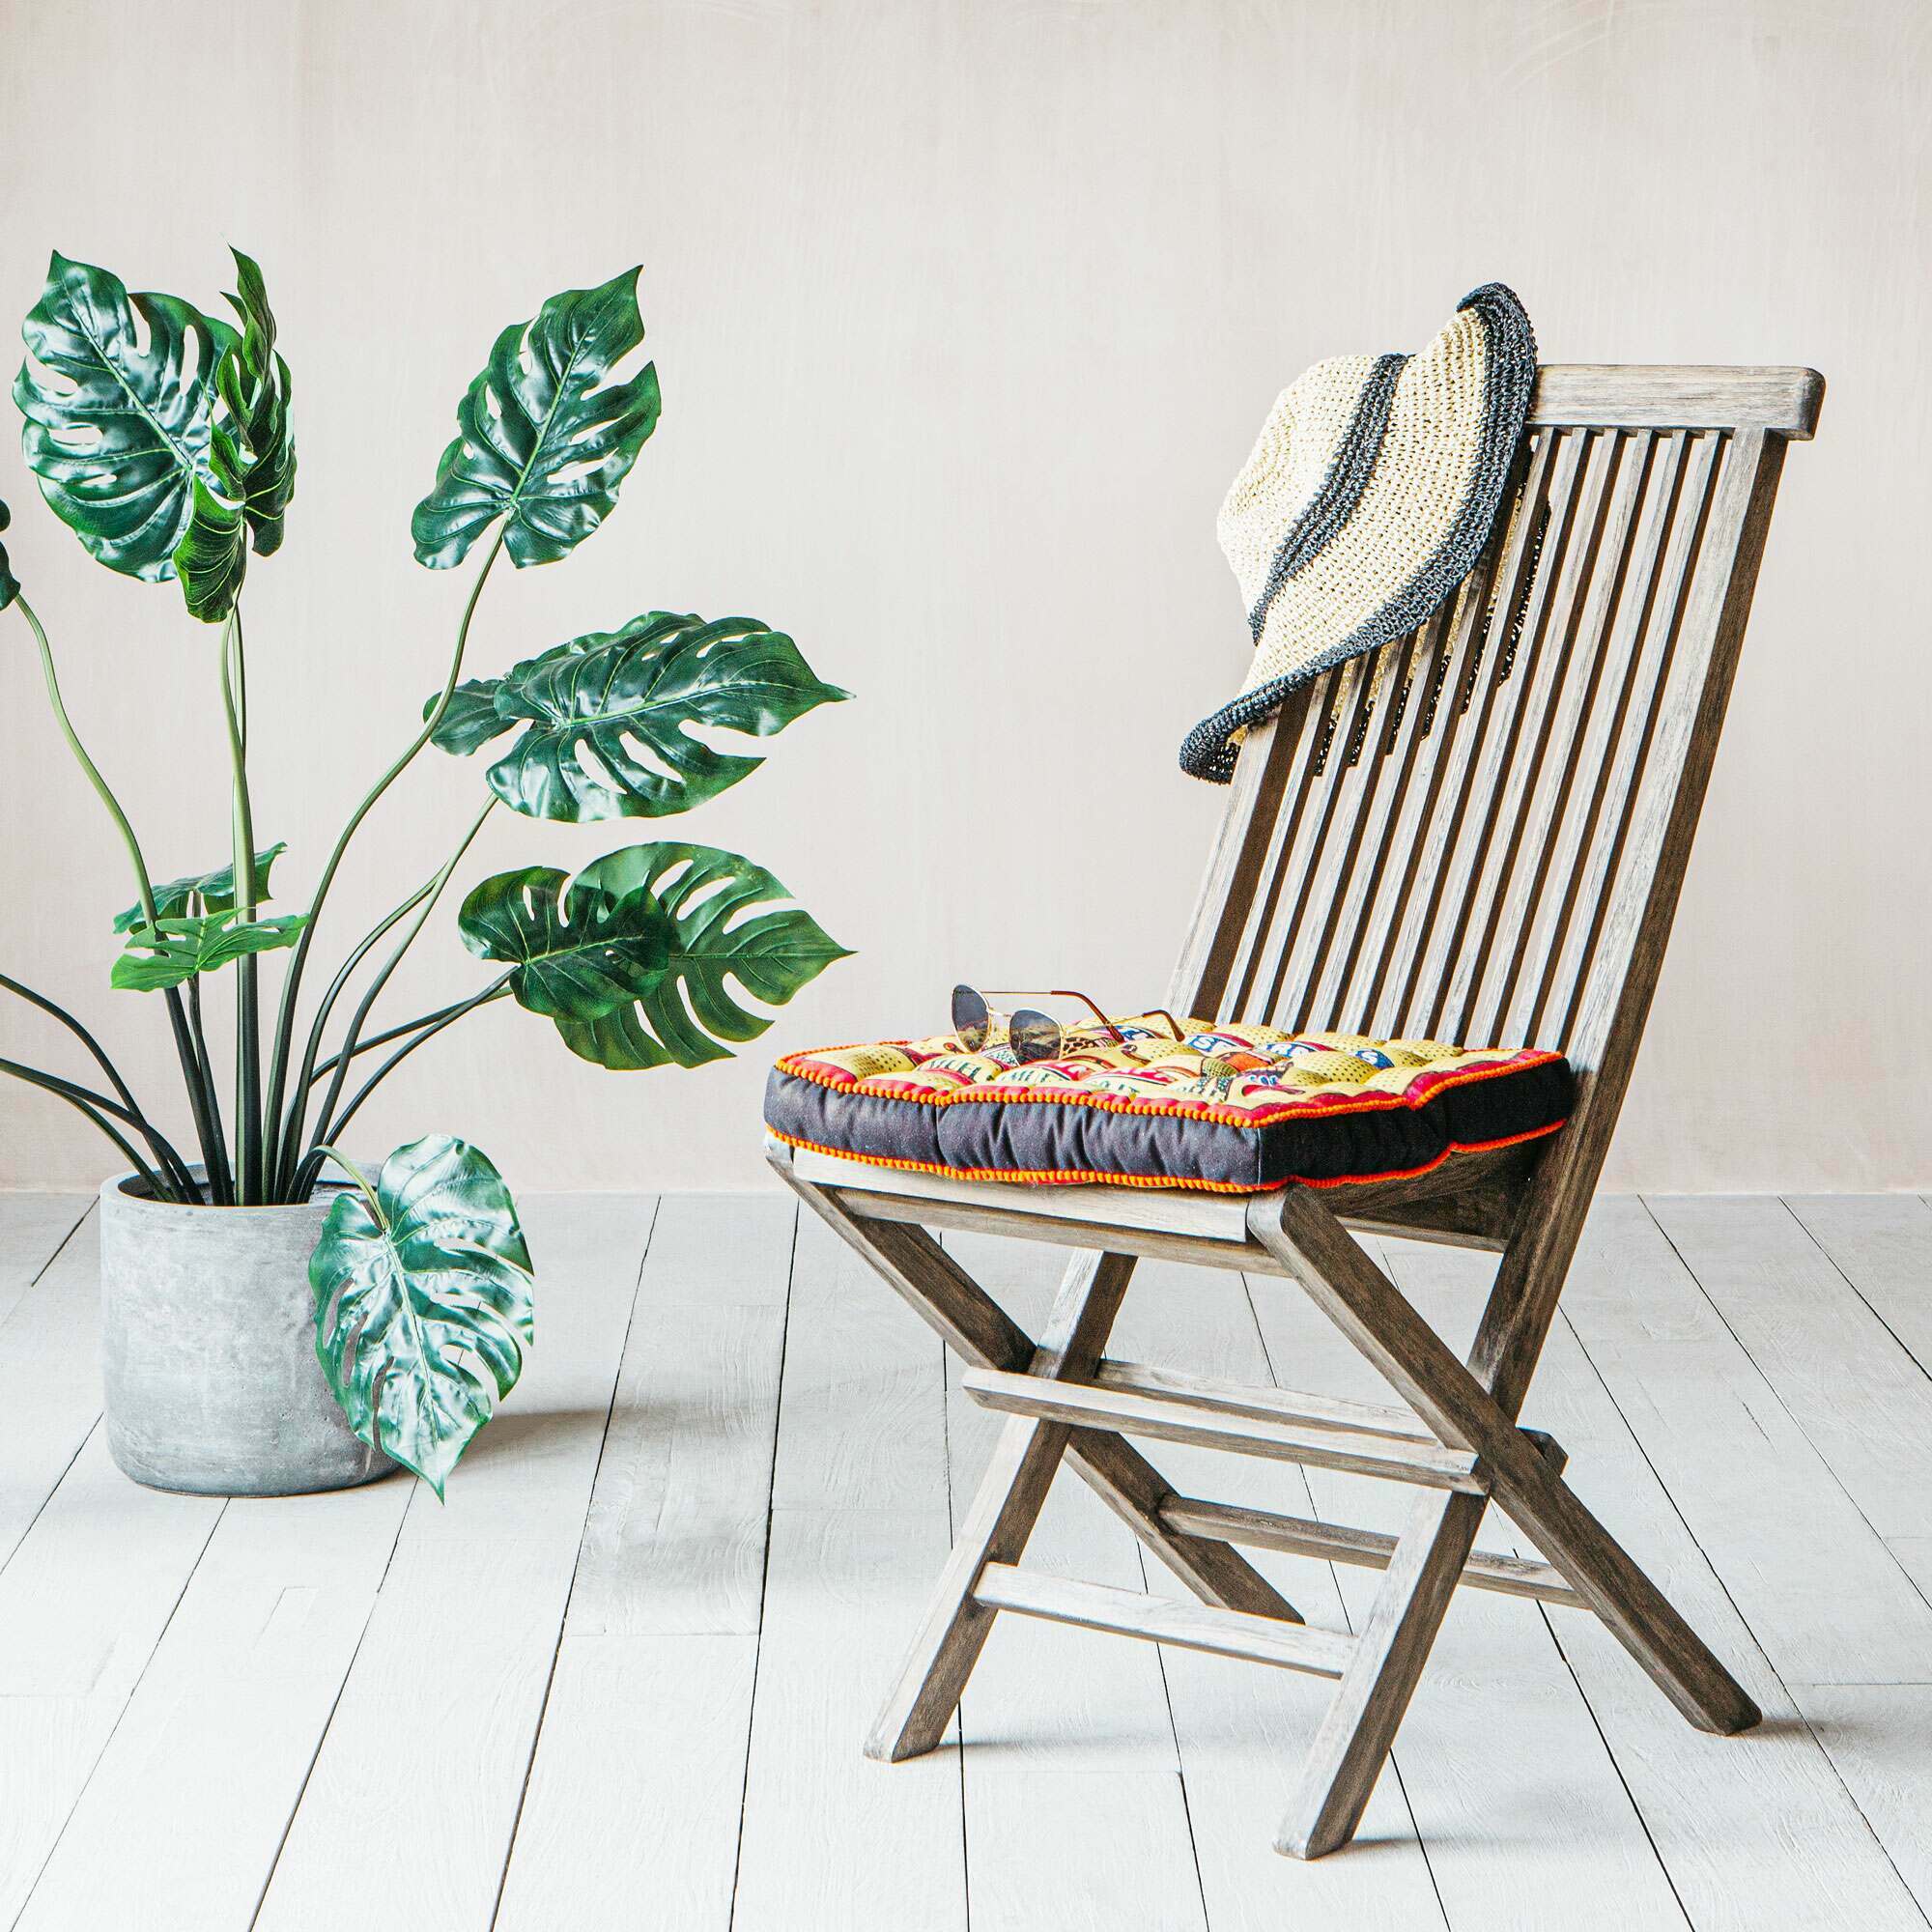 Read more about Graham and green grey teak garden chair